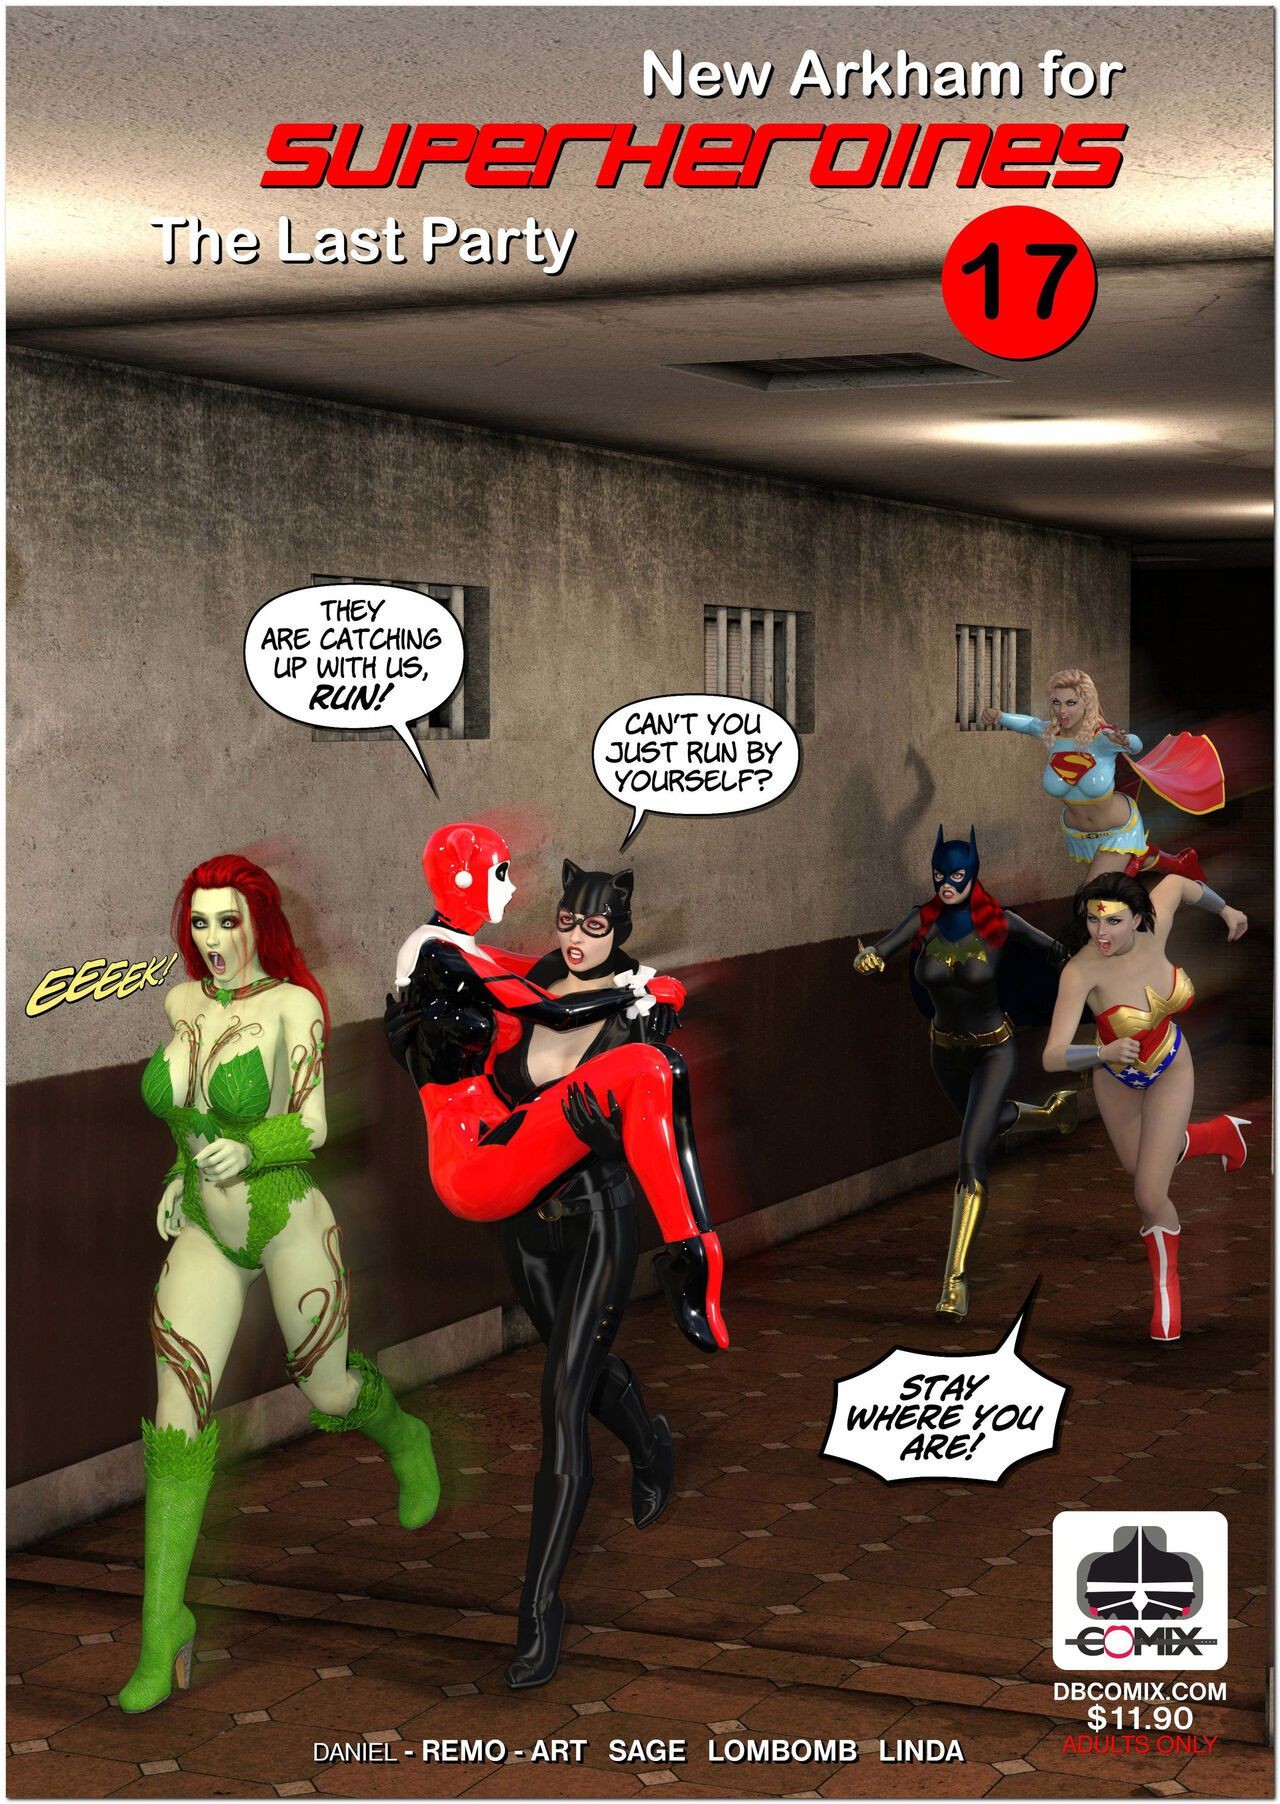 Wank [DBComix] New Arkham For Superheroines 17 - The Last Party First Time